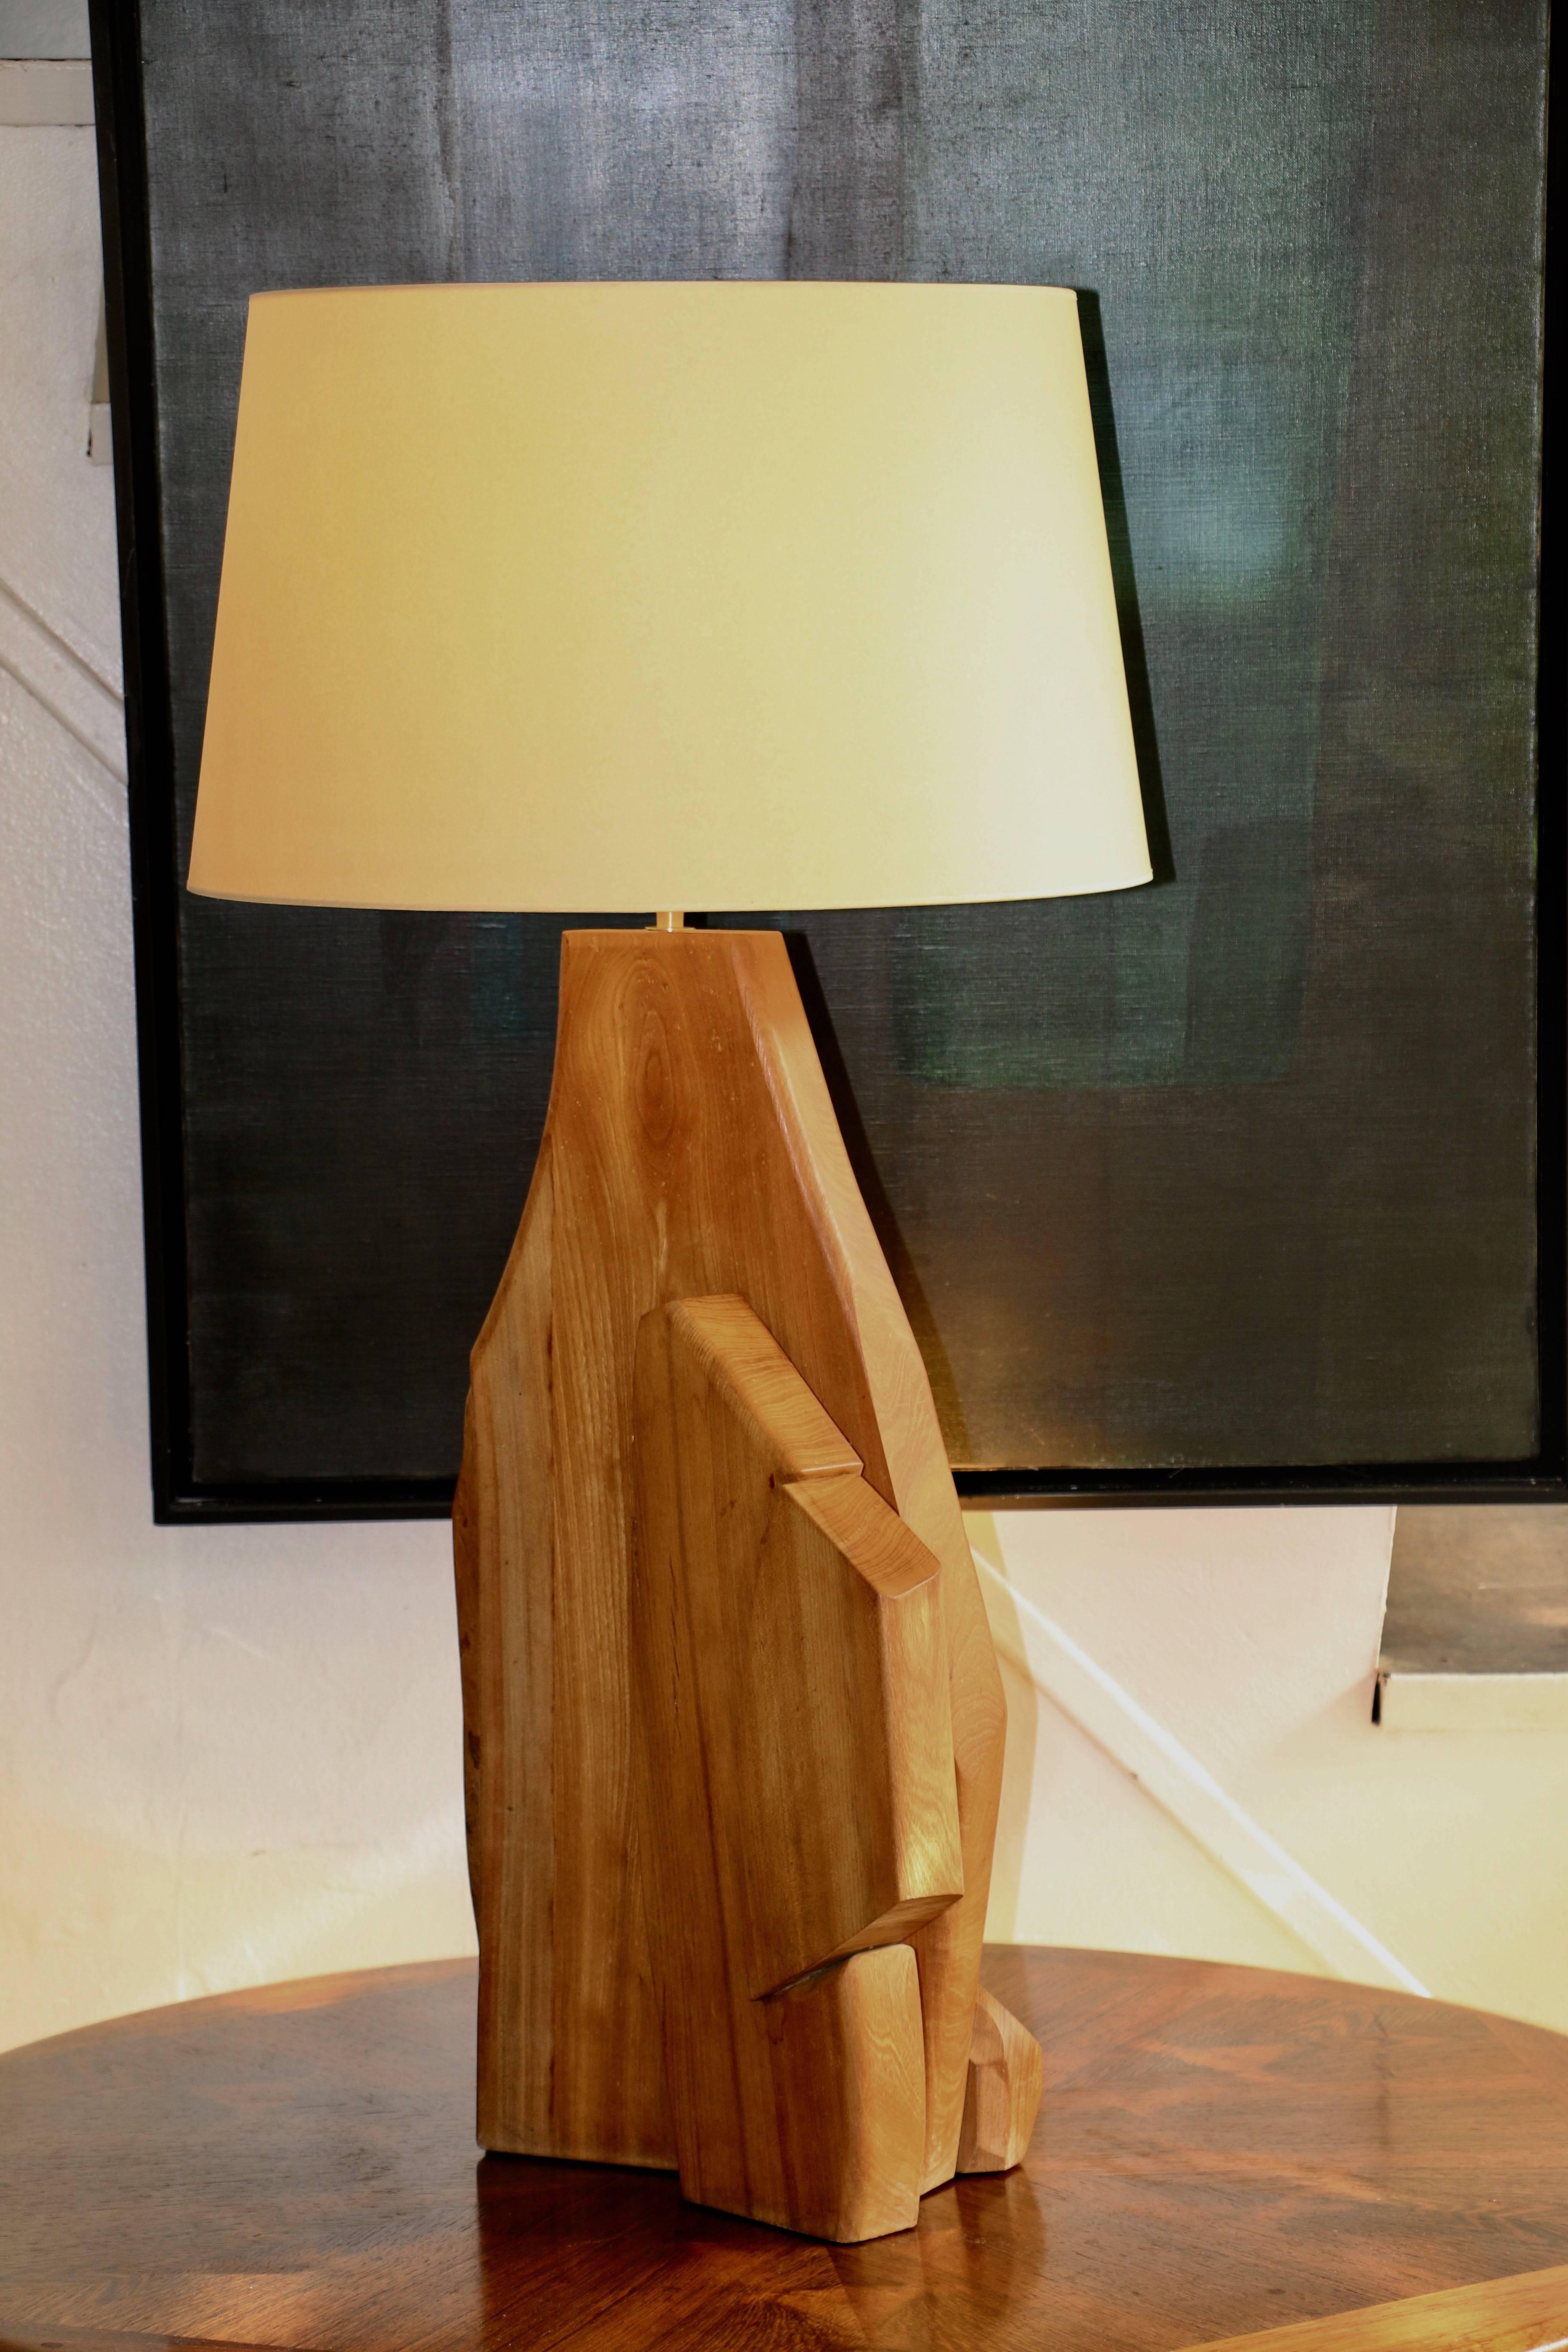 Large Wood Sculpture Table Lamp 2